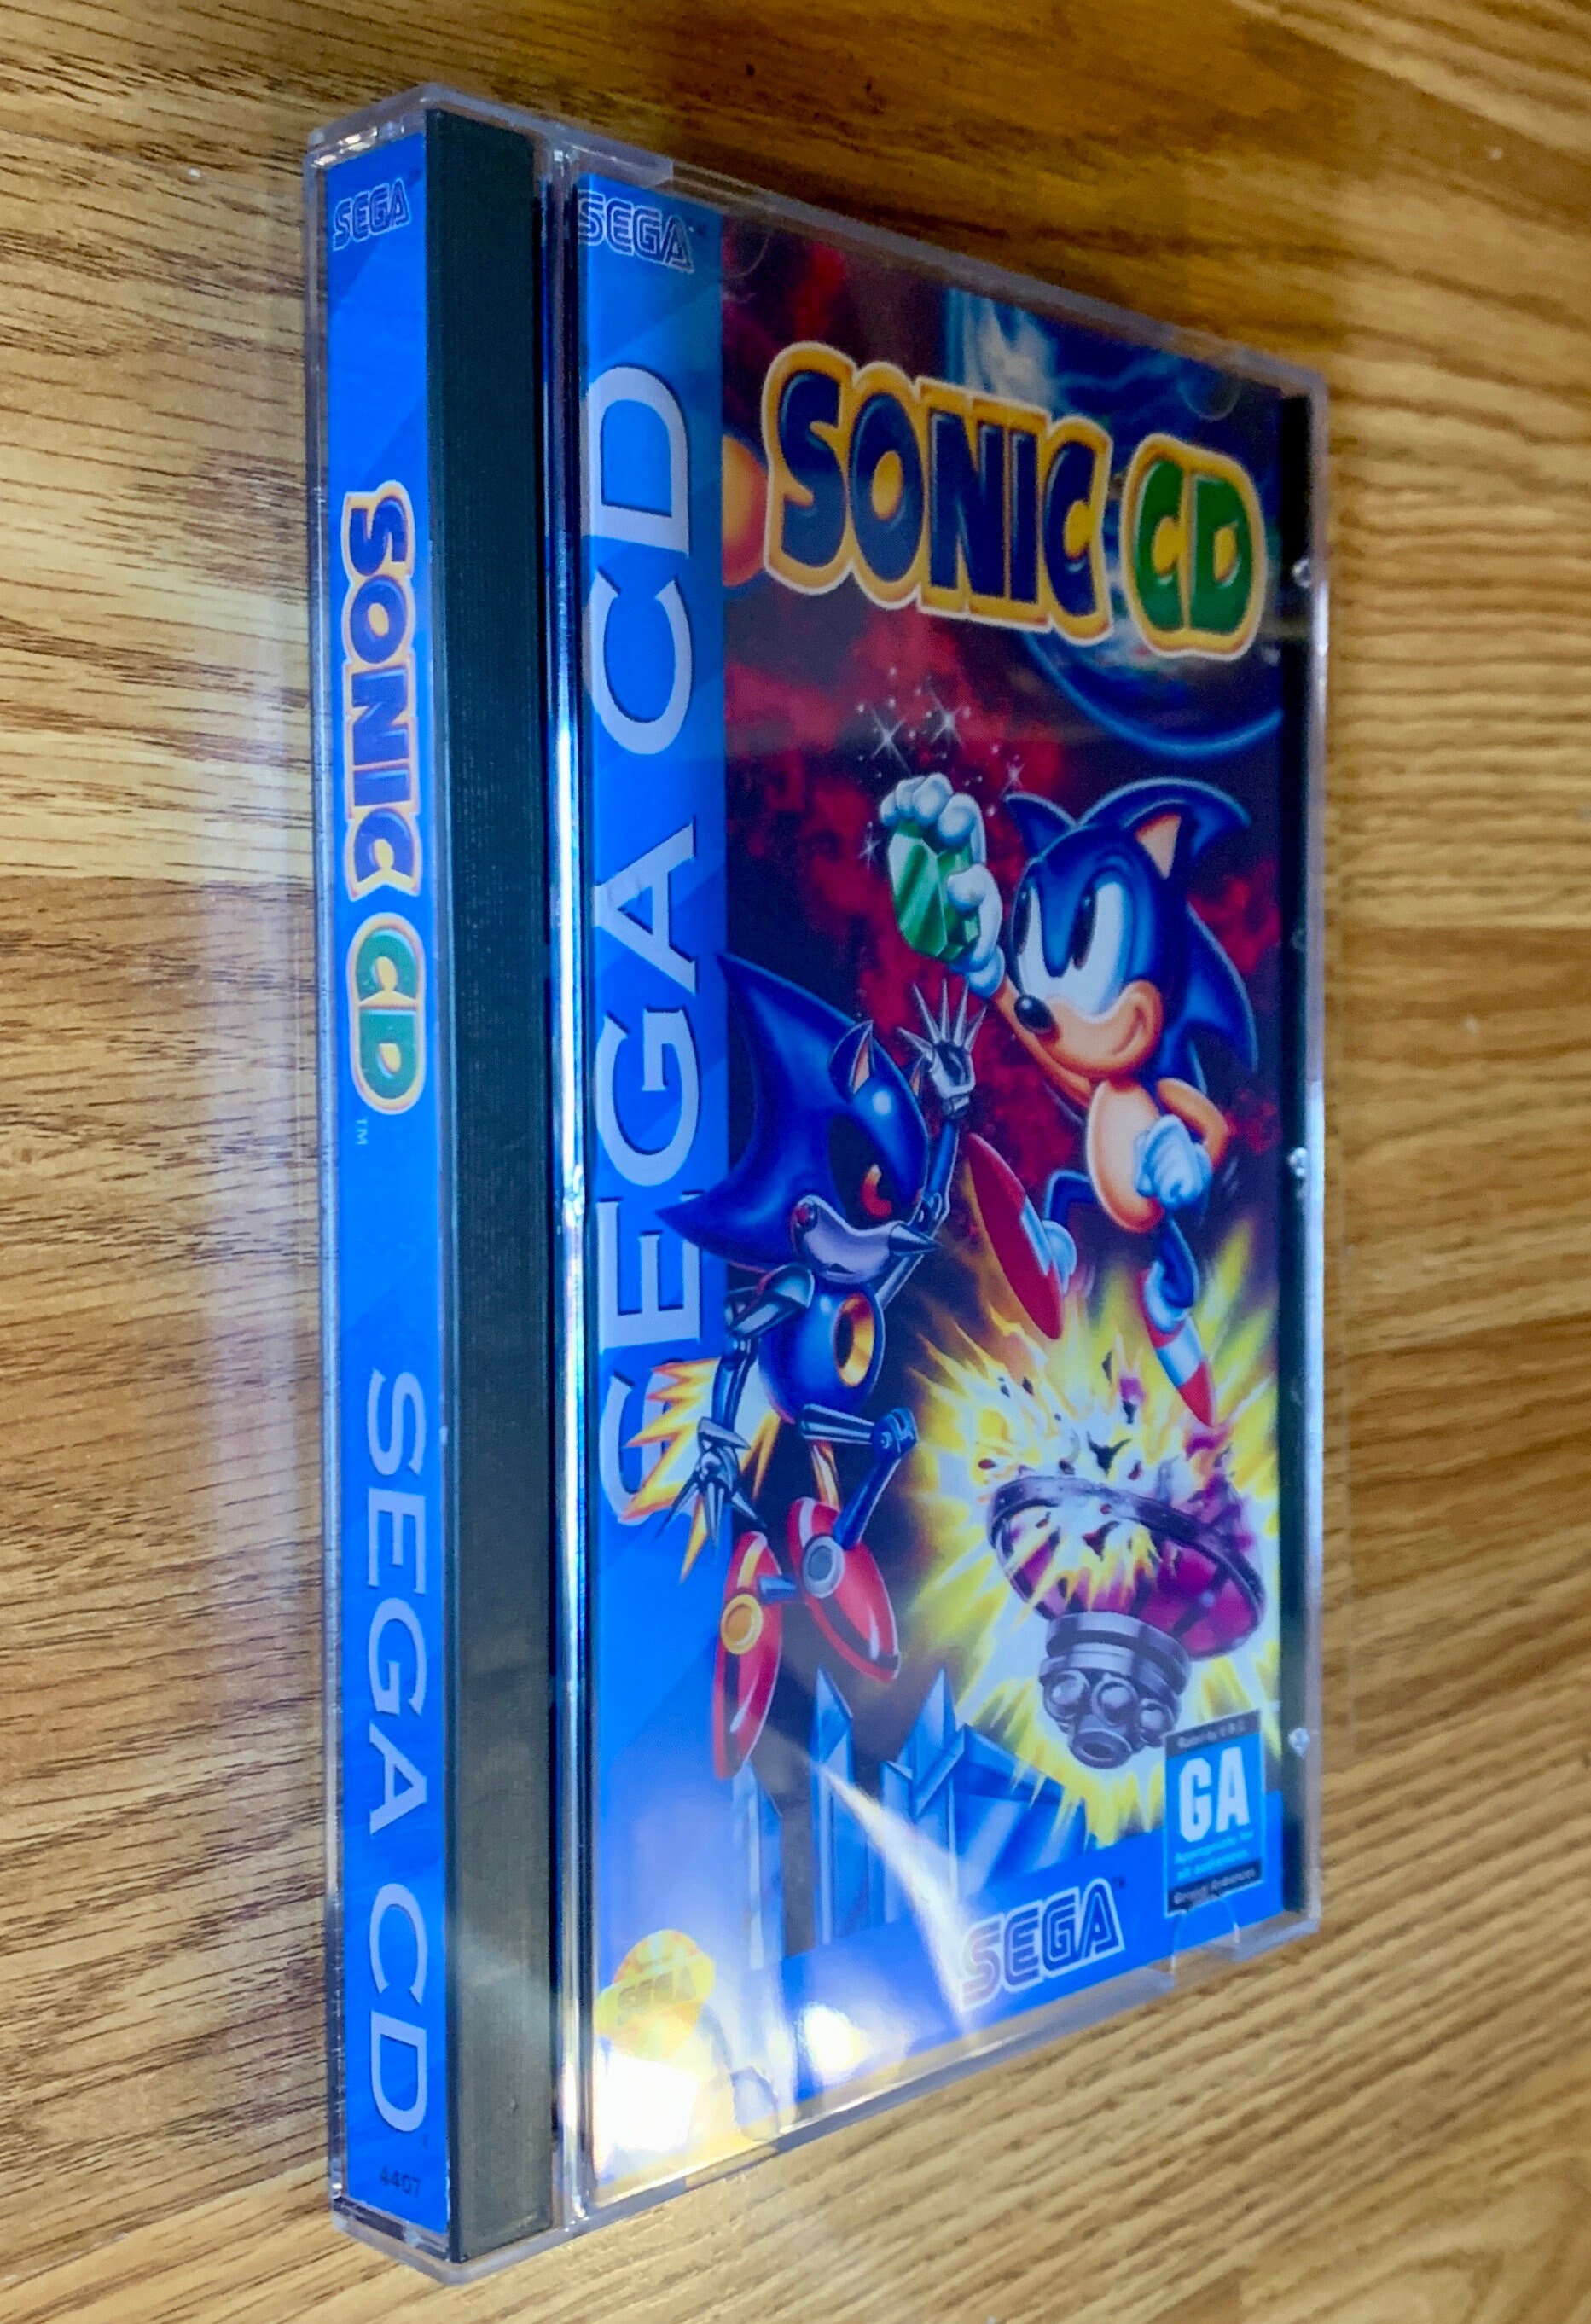 Sonic & Knuckles Collection Windows PC CD-ROM Sega w/ Jewel Case & User's  Guide